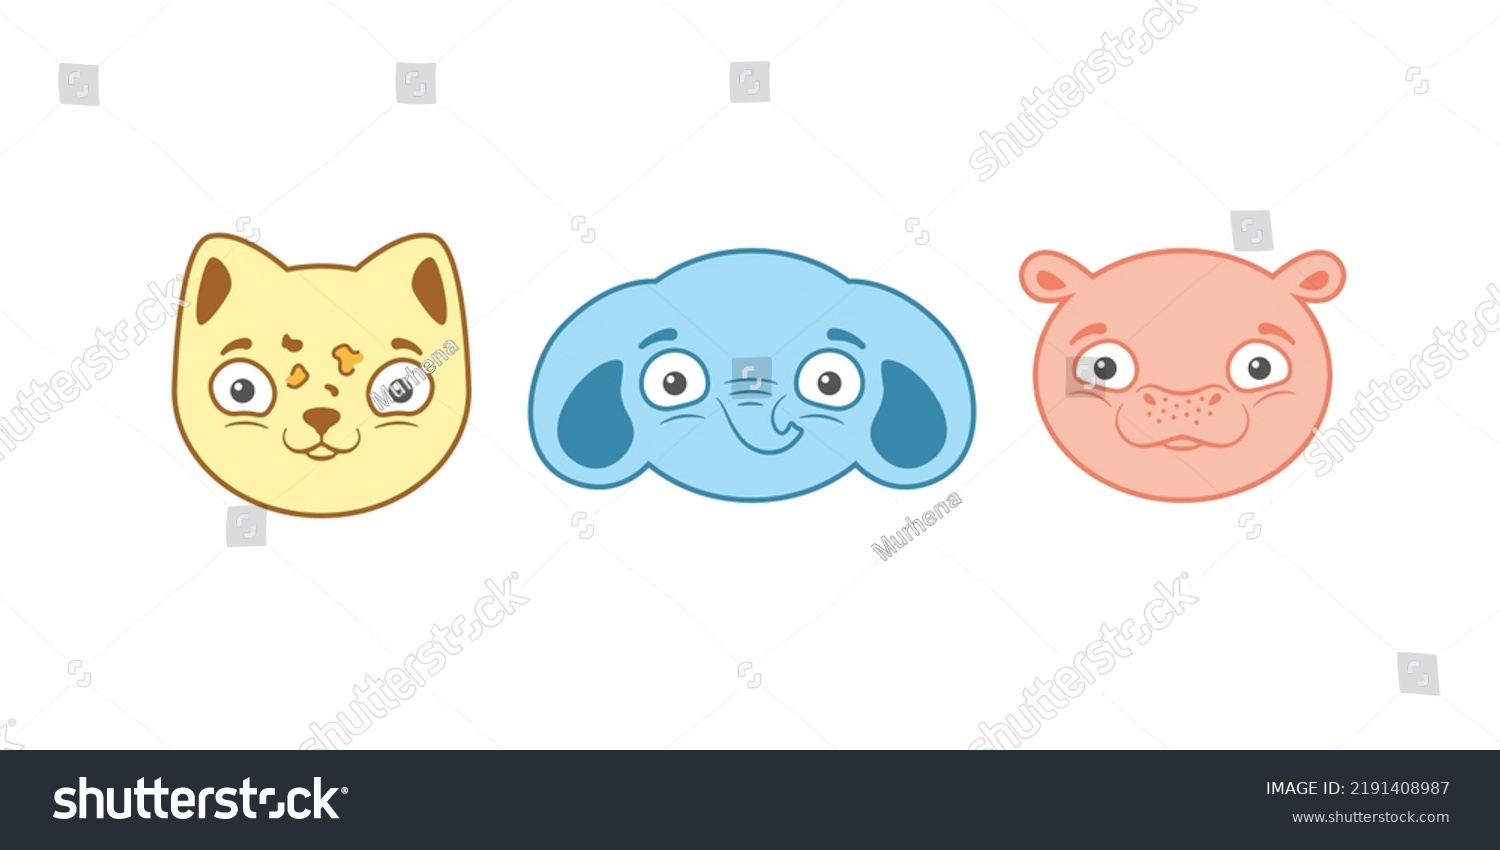 SVG of Set of three cartoon joyful cute muzzle. Happy lovely elephant, leopard and hippo faces for kids sticker or any other childish design. Funny colorful animal heads illustration svg